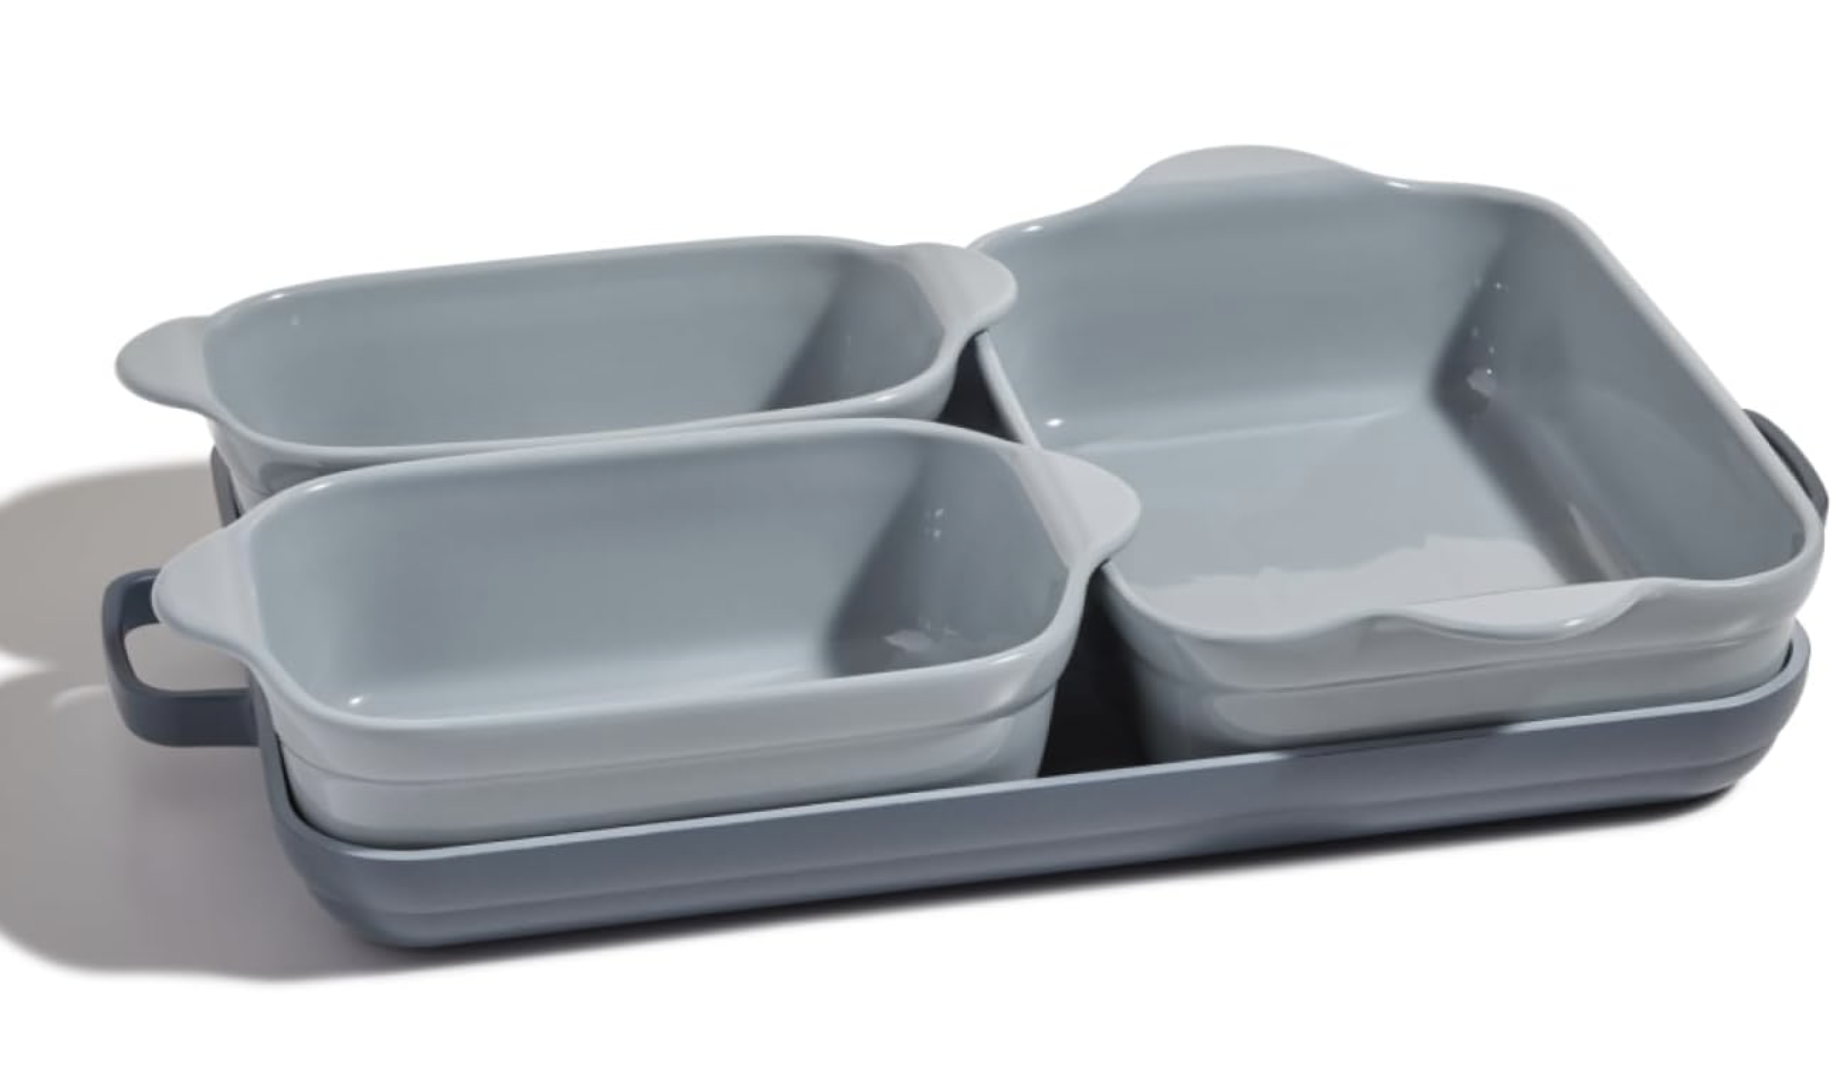 Our Place Ovenware Set | 5-Piece Nonstick, Toxin-Free, Ceramic, Stoneware Set with Oven Pan, Bakers, & Oven Mat | Space-Saving Nesting Design | Oven-Safe | Bake, Roast, Griddle and more | Blue Salt